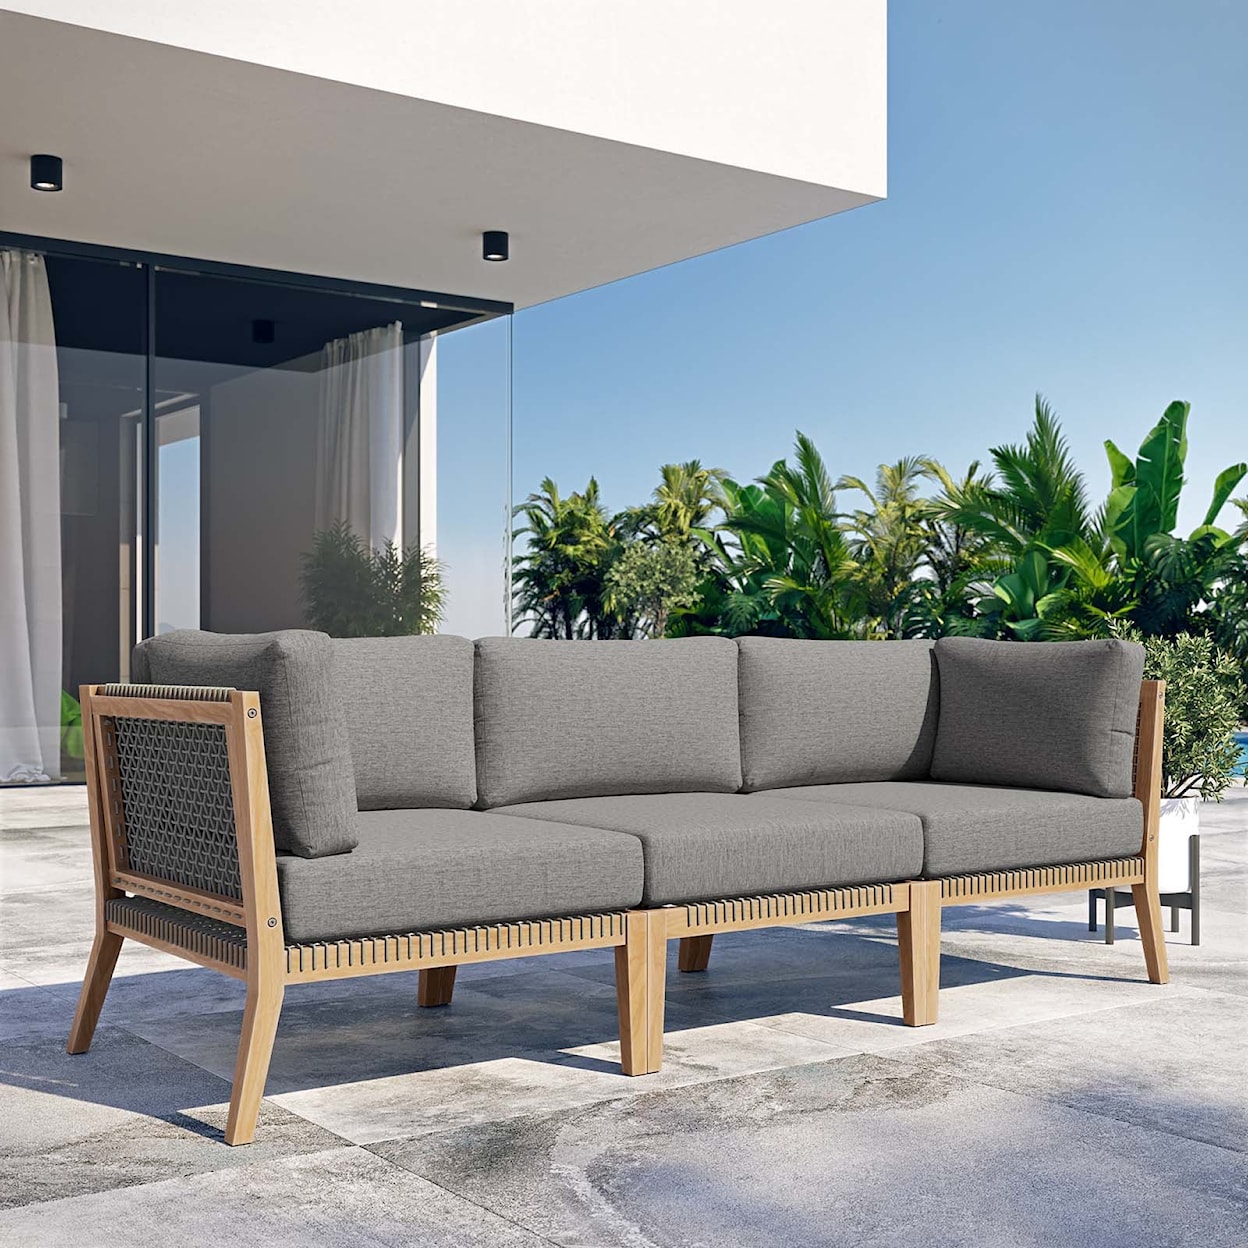 Modway Clearwater Outdoor Patio 3-Piece Sectional Sofa